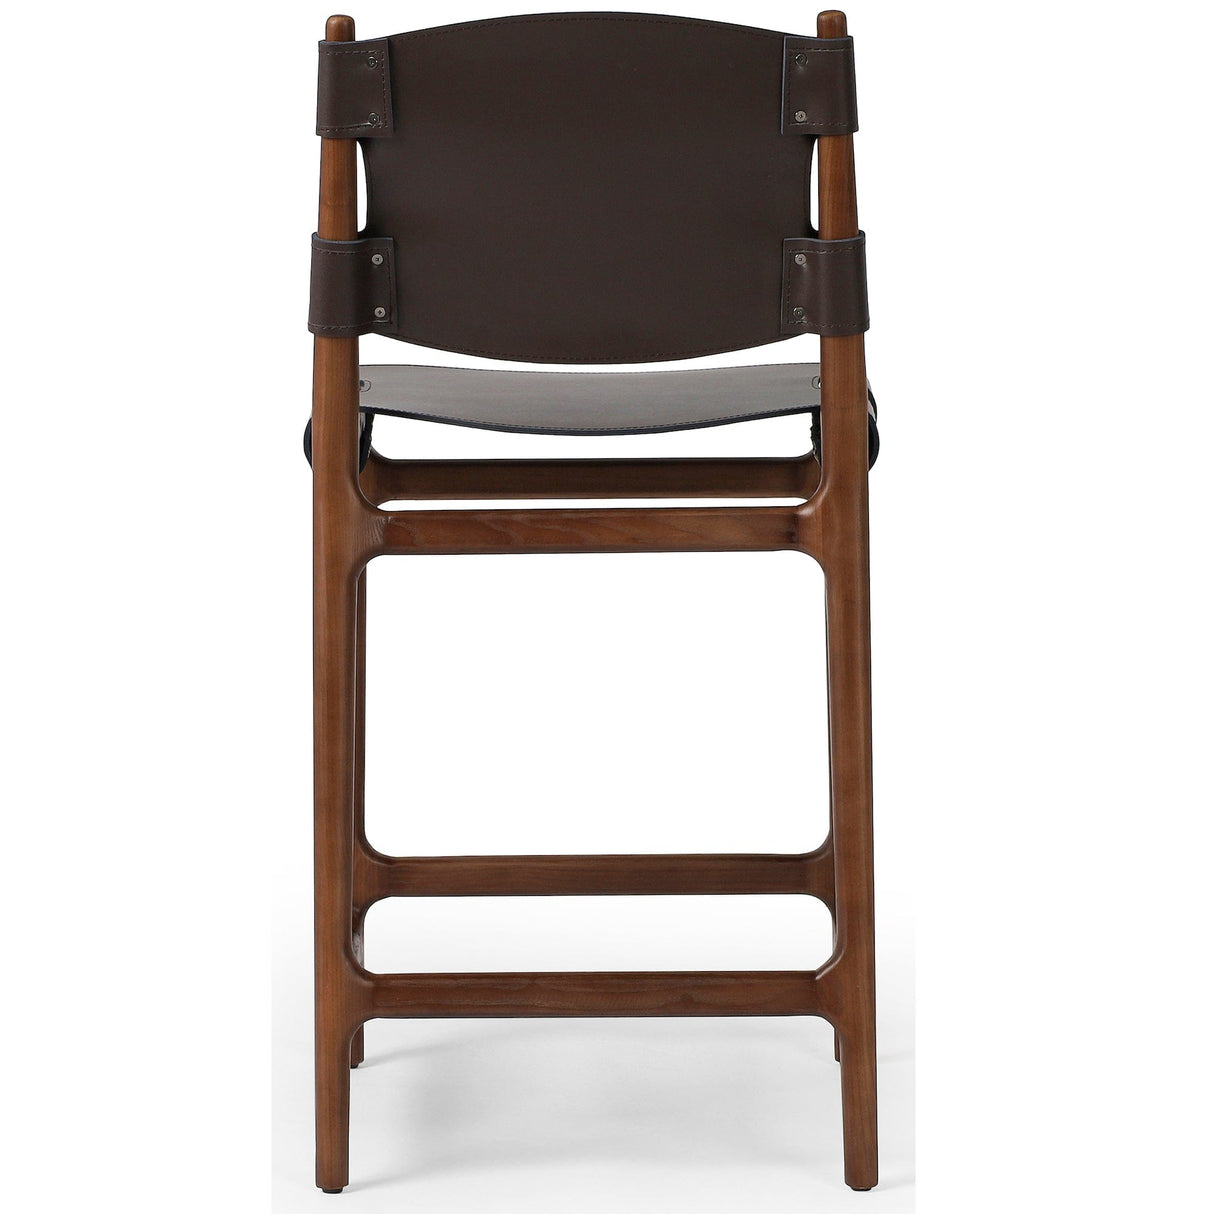 Four Hands Lulu Counter Stool - Espresso Leather Blend